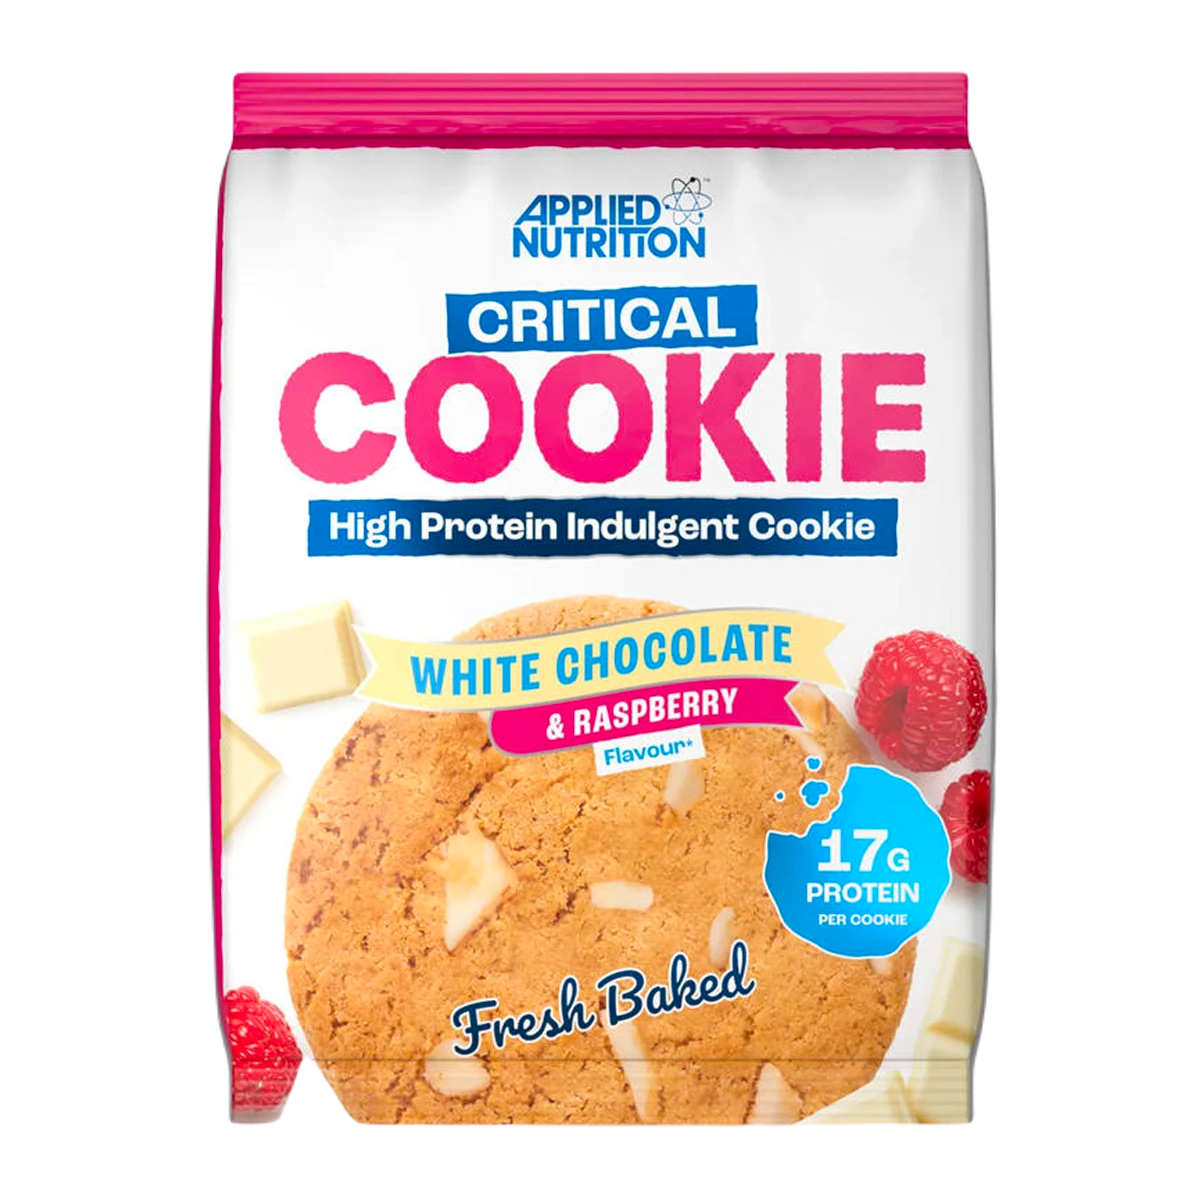 CRITICAL COOKIE APPLIED NUTRITION